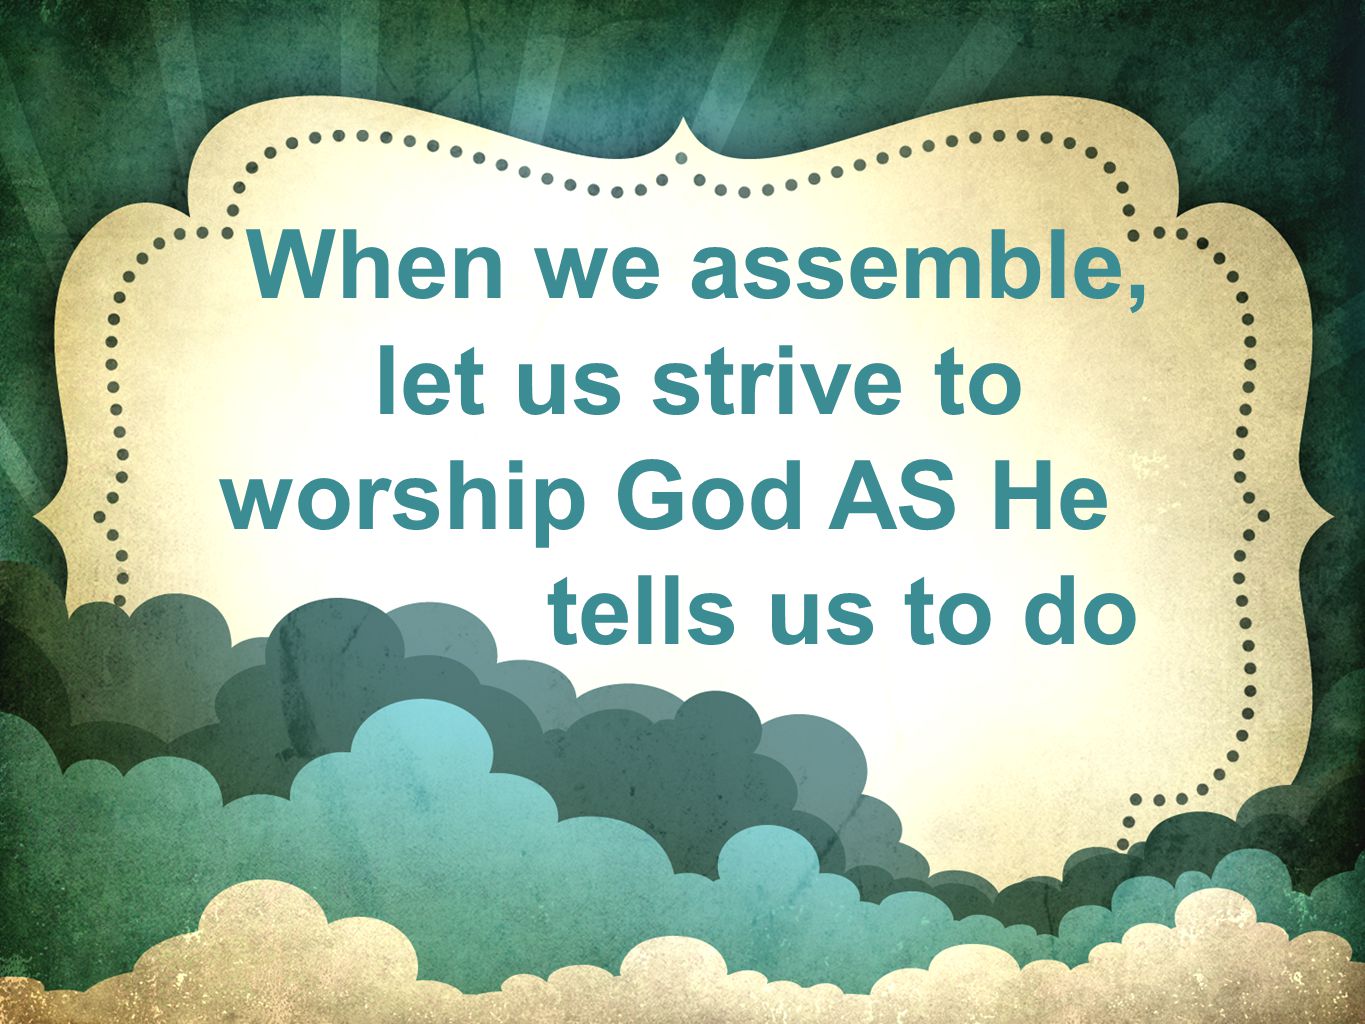 When we assemble, let us strive to worship God AS He tells us to do